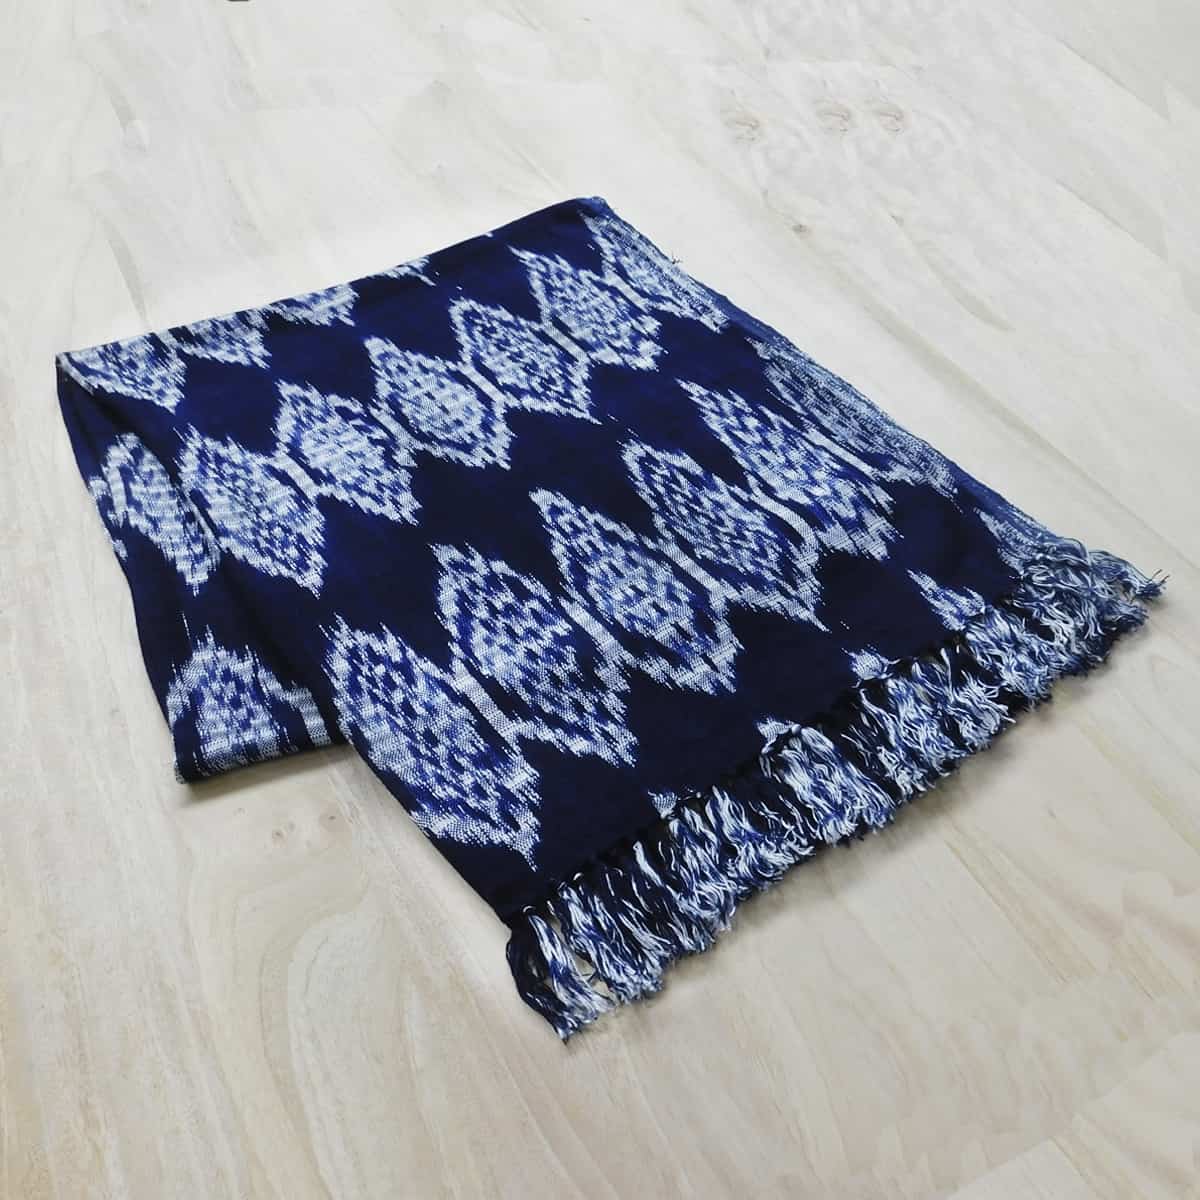 A Guatemalan scarf with a traditional ikat pattern in navy blue and white with a fringe is on a light wood background